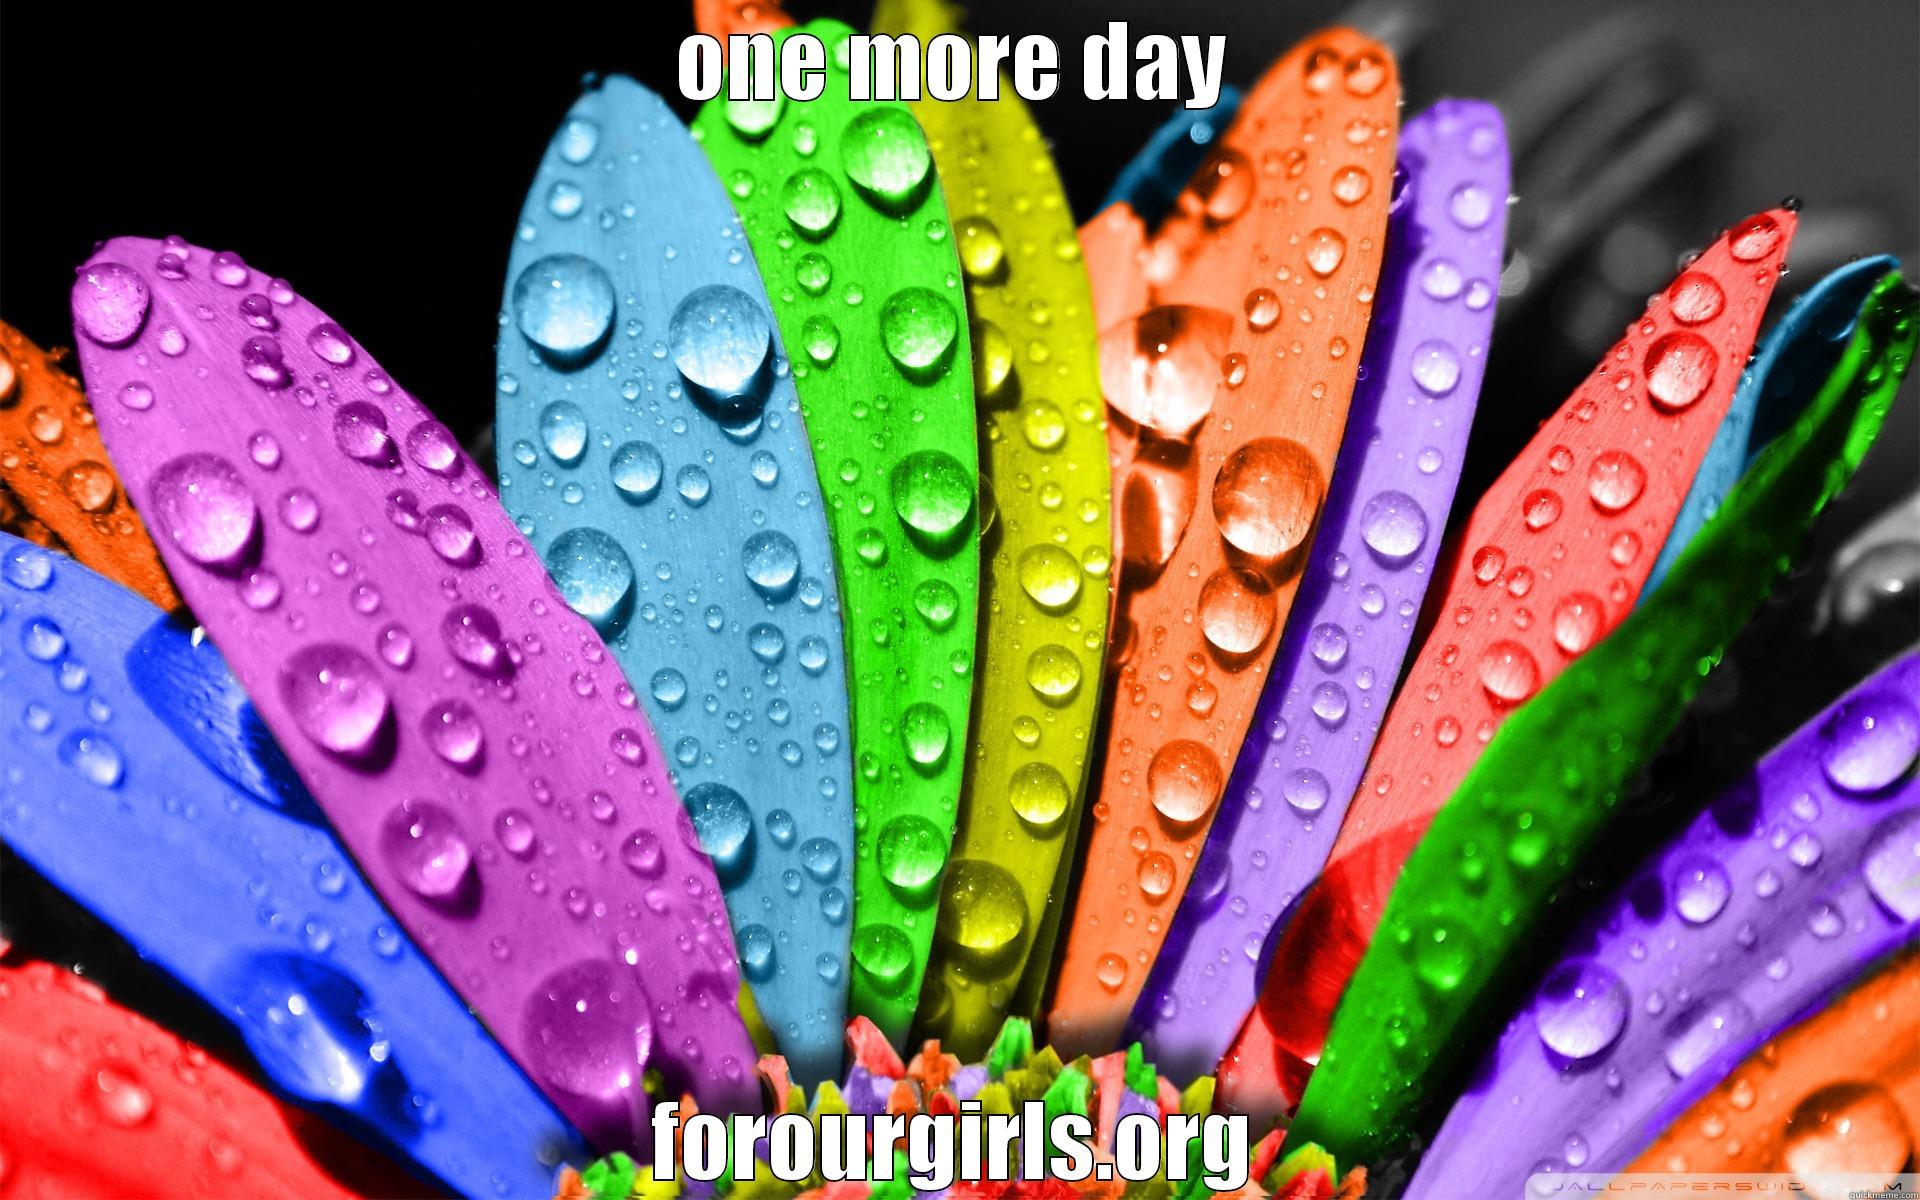 FOG is coming - ONE MORE DAY FOROURGIRLS.ORG Misc